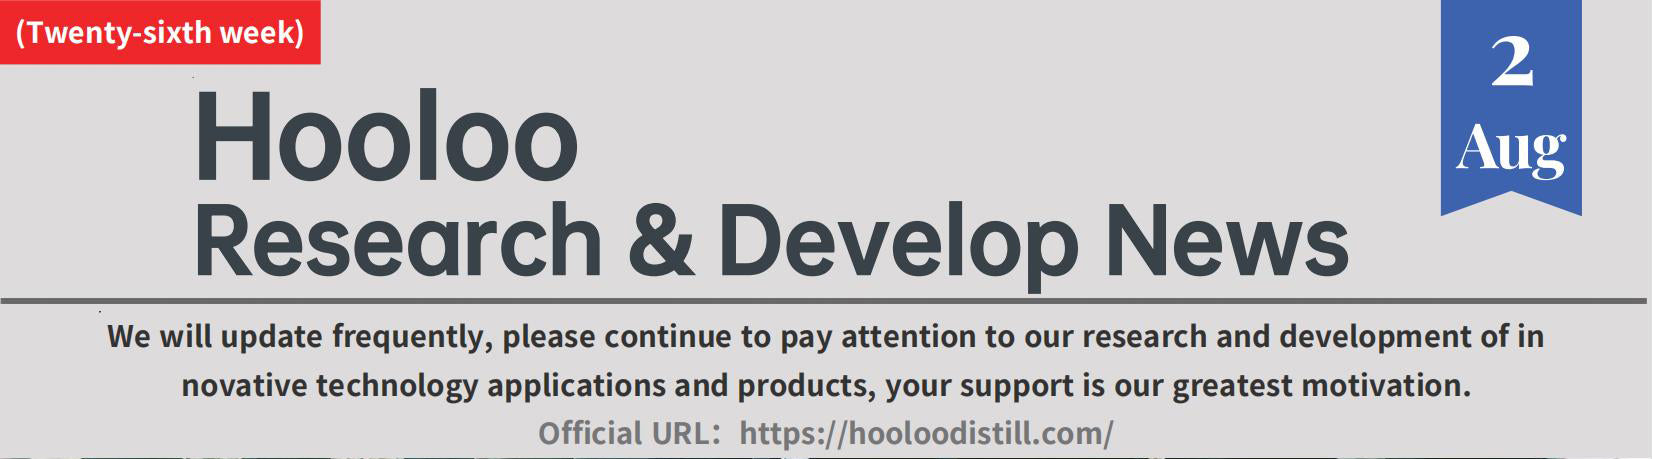 Hooloo Research & Develop News (issue 26)